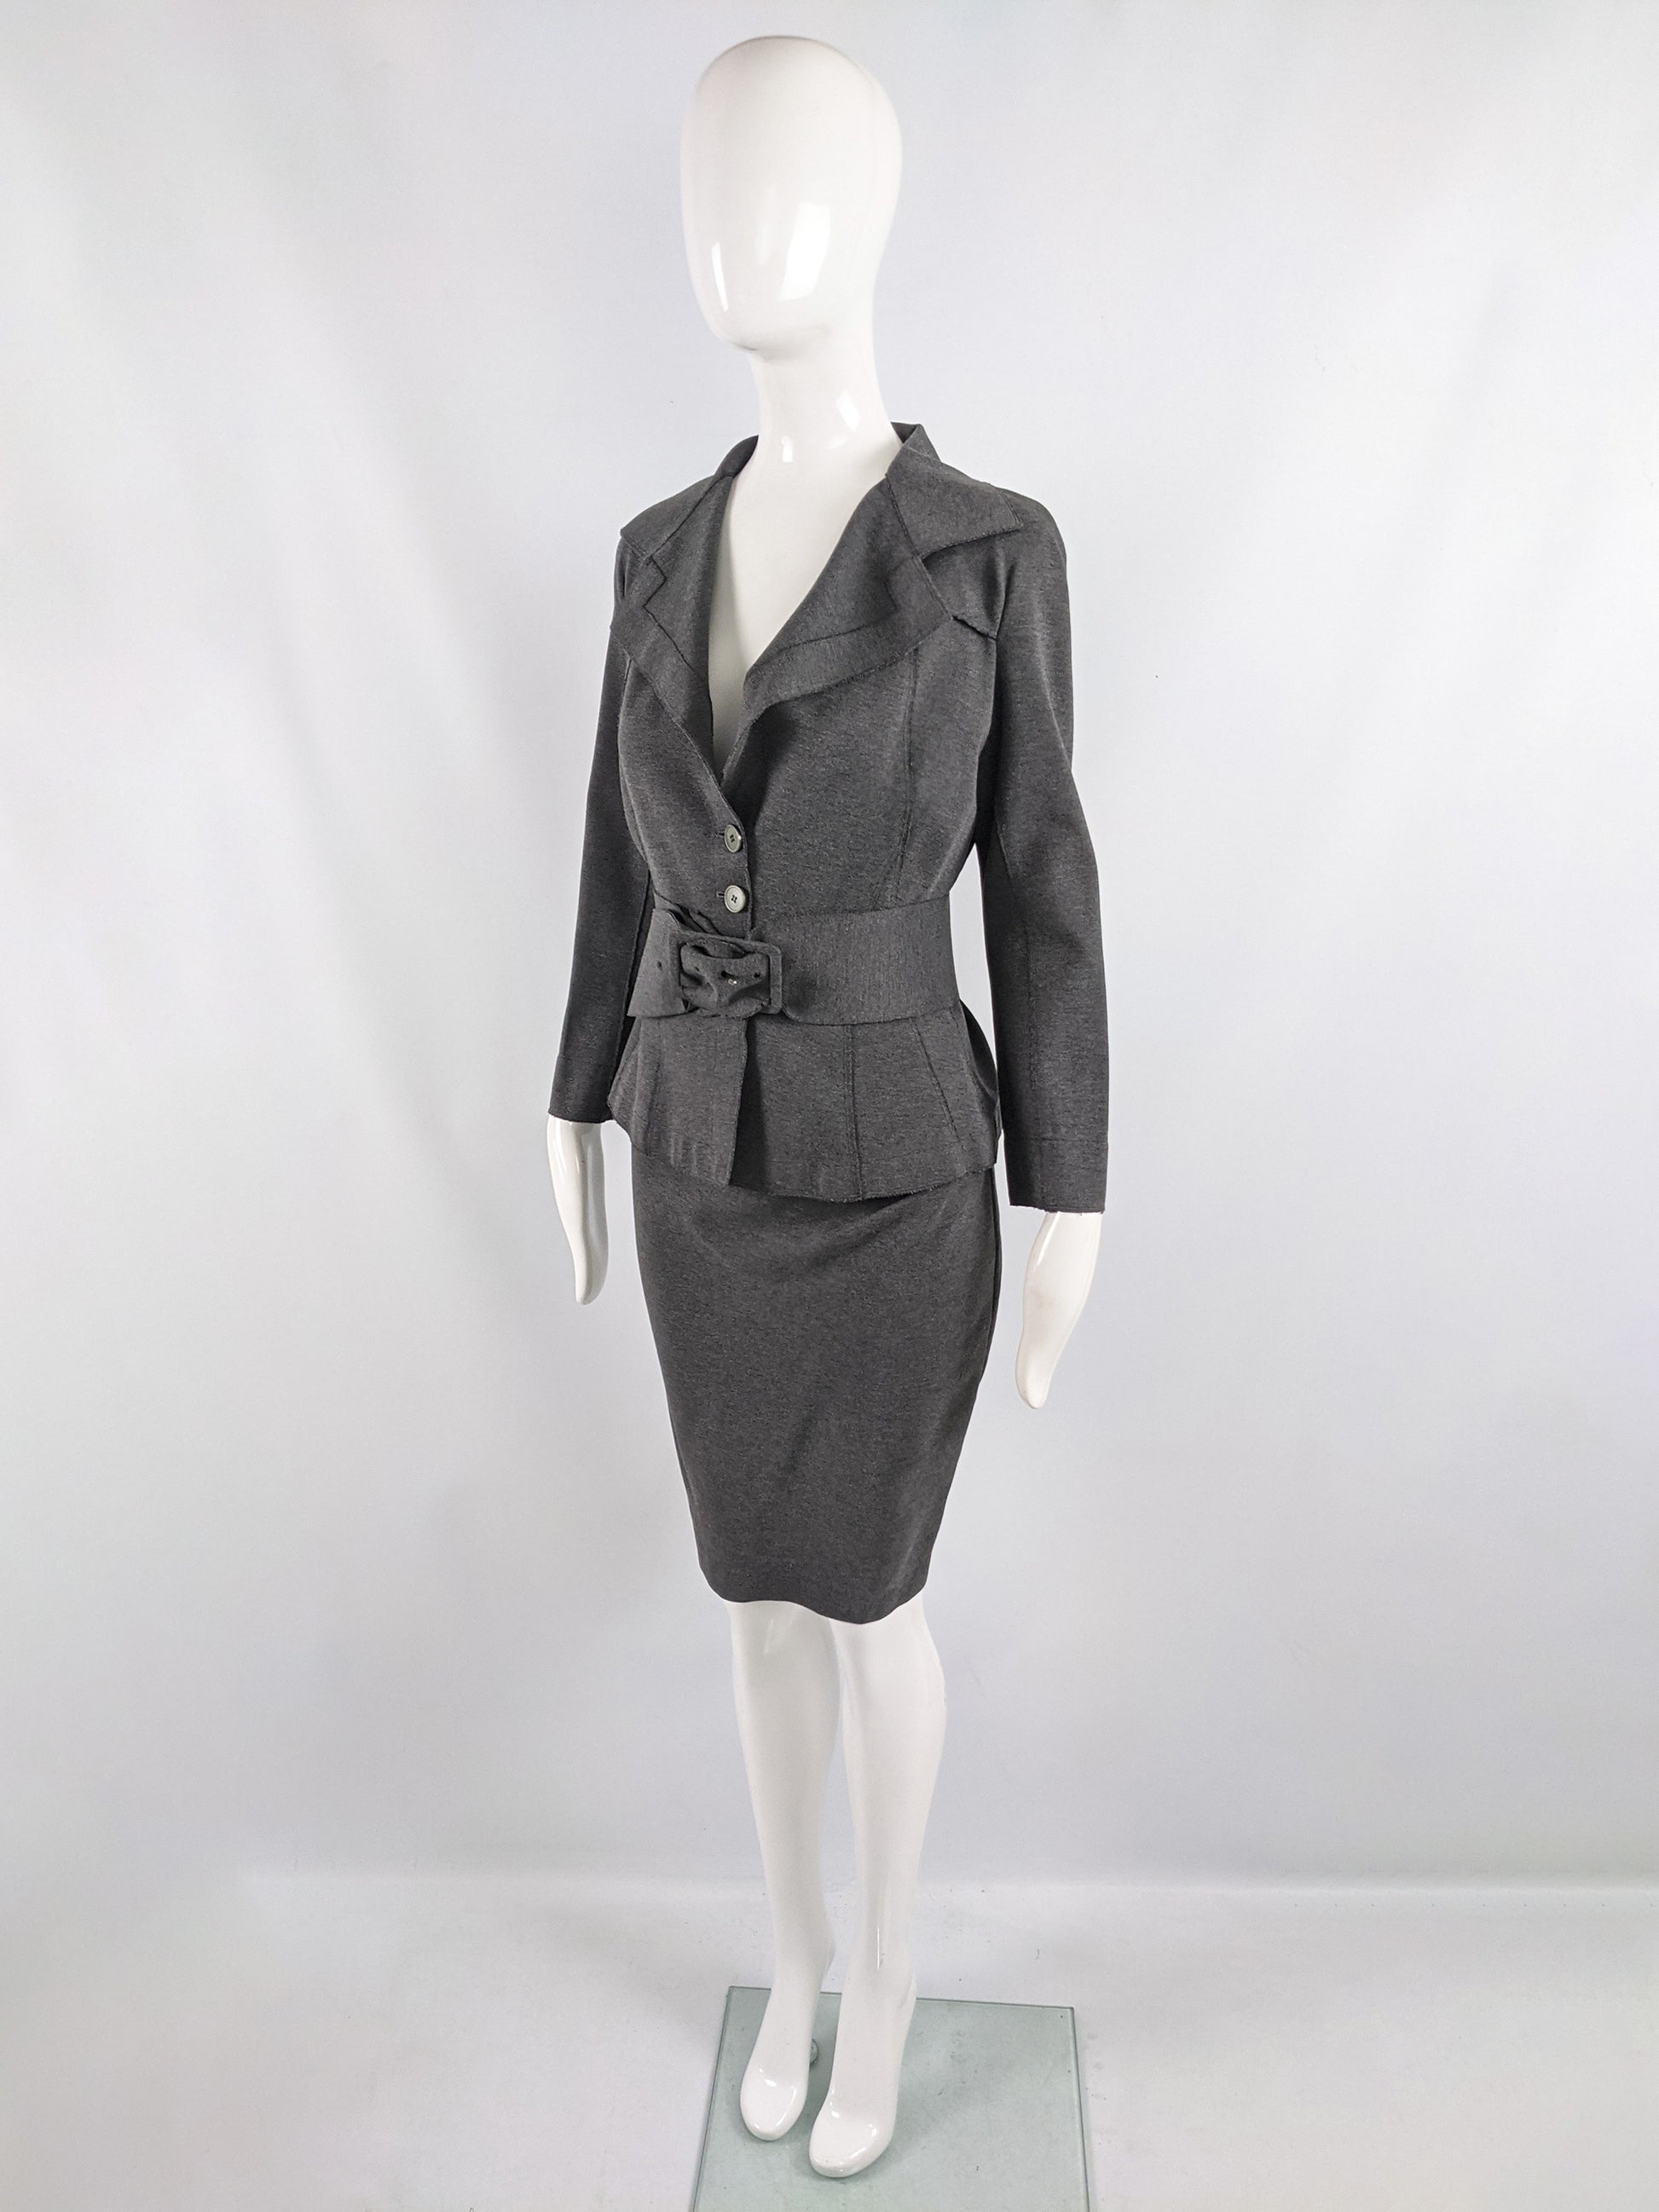 An image of a grey vintage Donna Karan suit for women, consisting of a pencil skirt, blazer and belt.